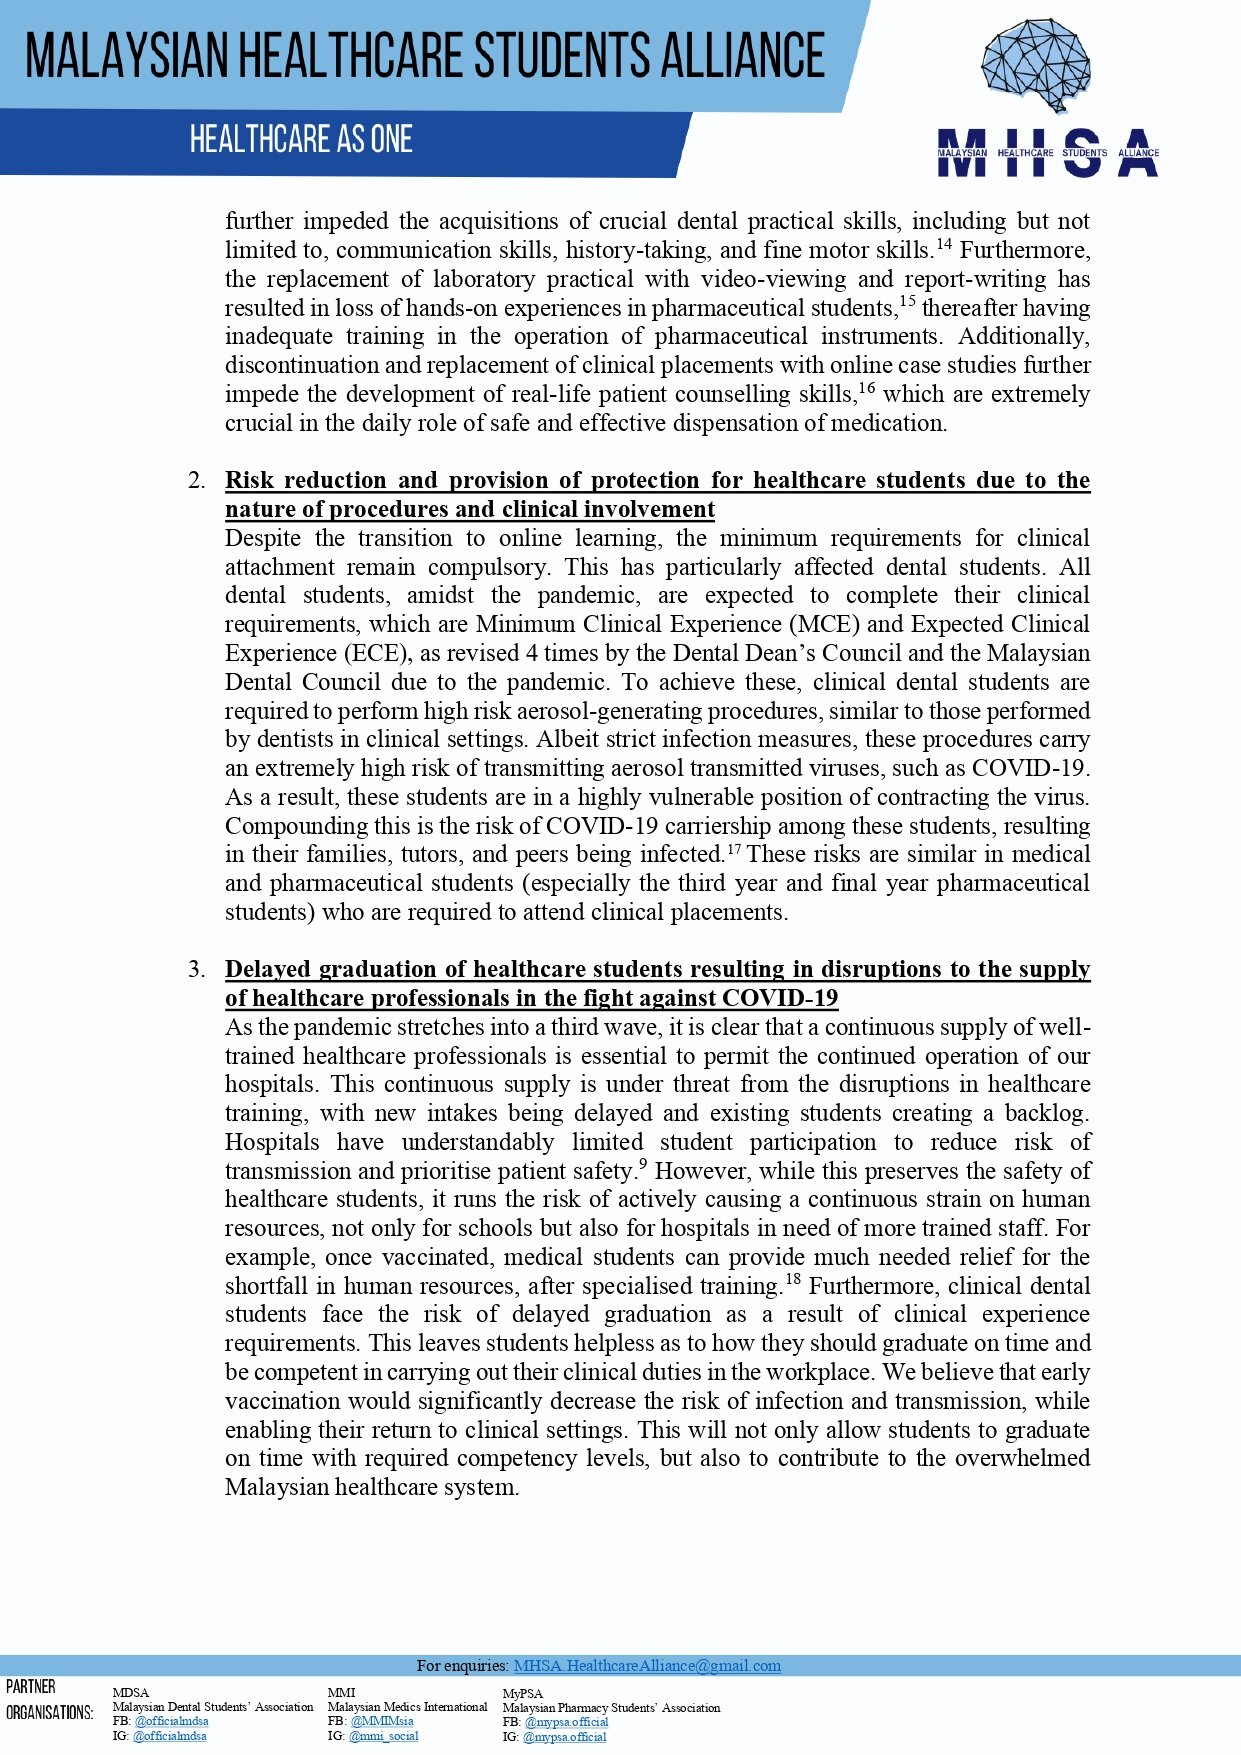 MHSA “A Call for Healthcare Students to be Vaccinated” Press Statement_page-0002.jpg